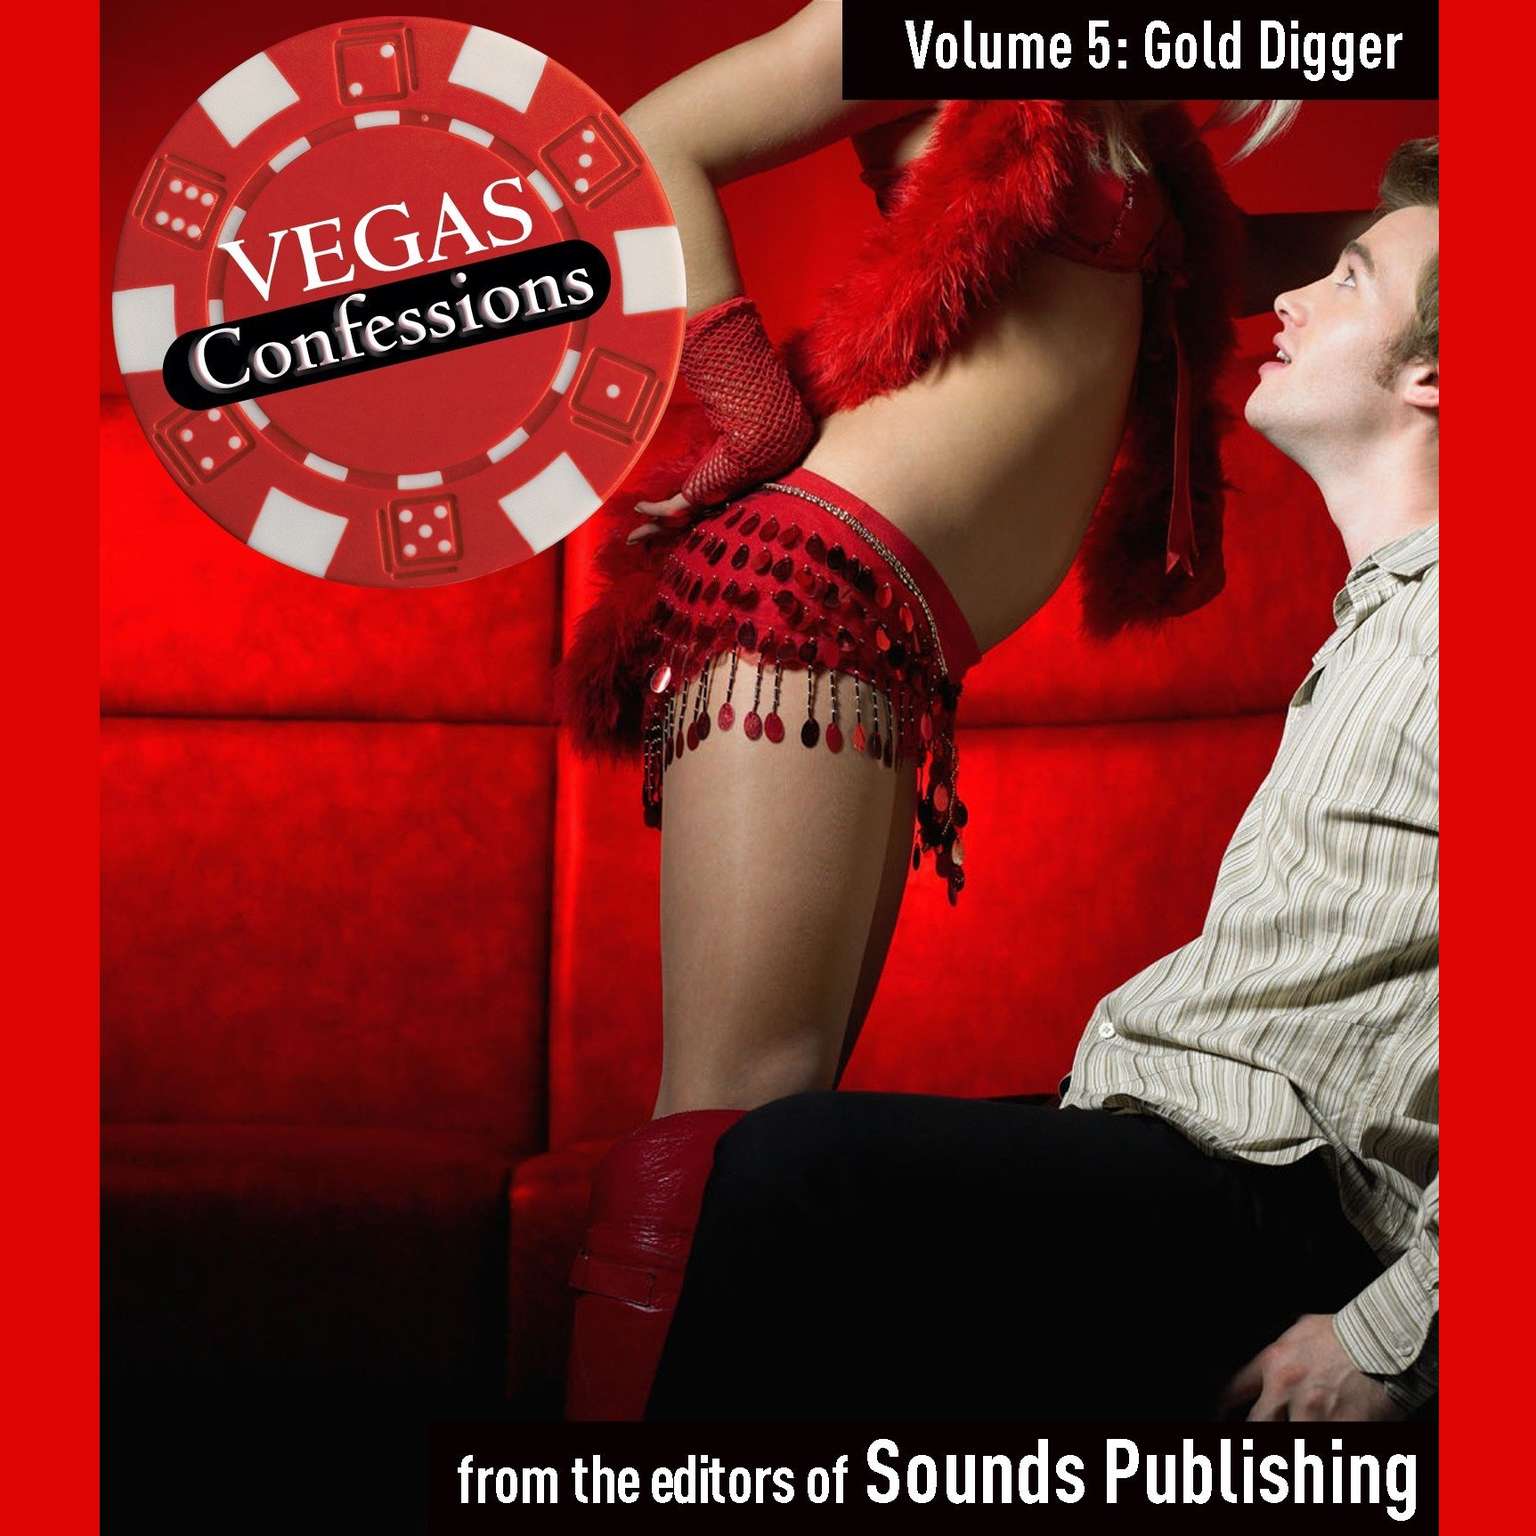 Vegas Confessions 5: Gold Digger Audiobook, by The Editors of Sounds Publishing